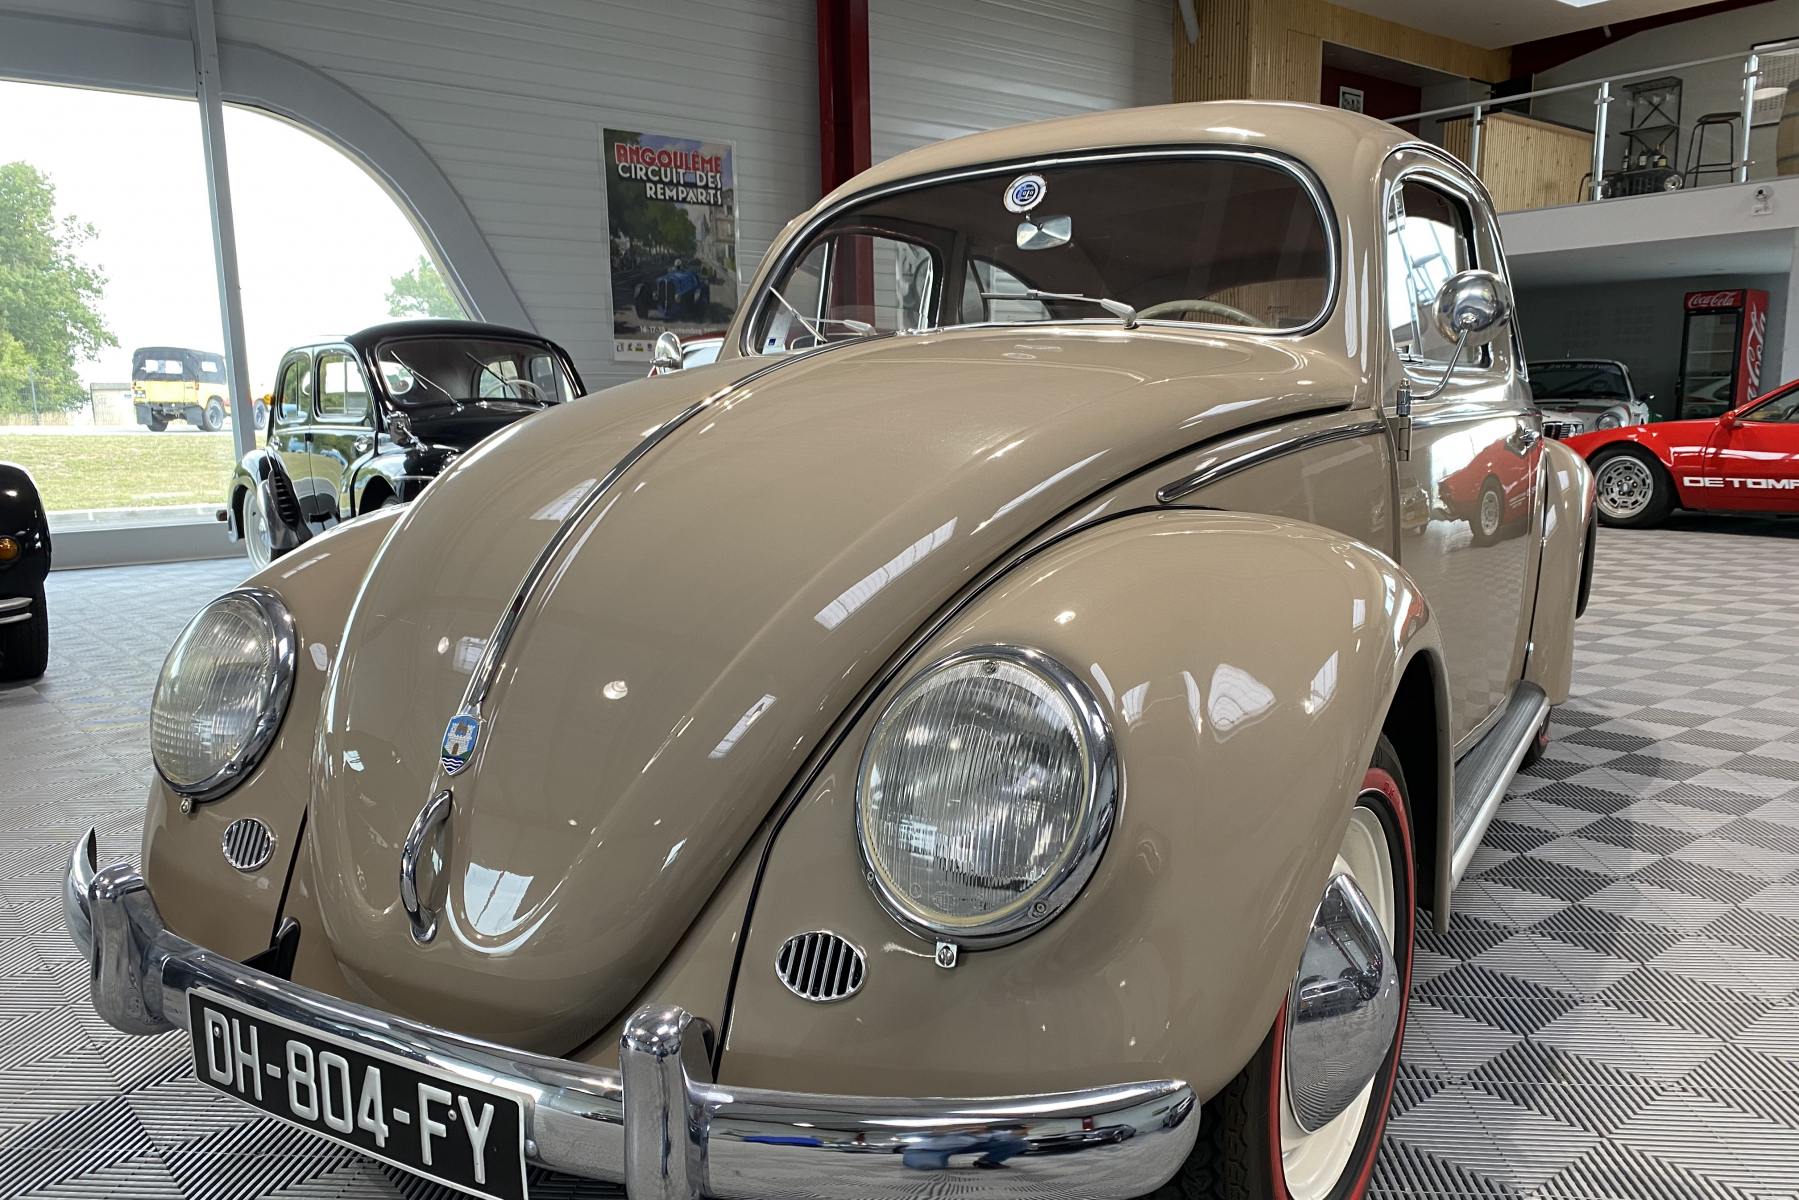 Vente-annonce-Volkswagen-Ovale Old Speed-classic-auto-restor